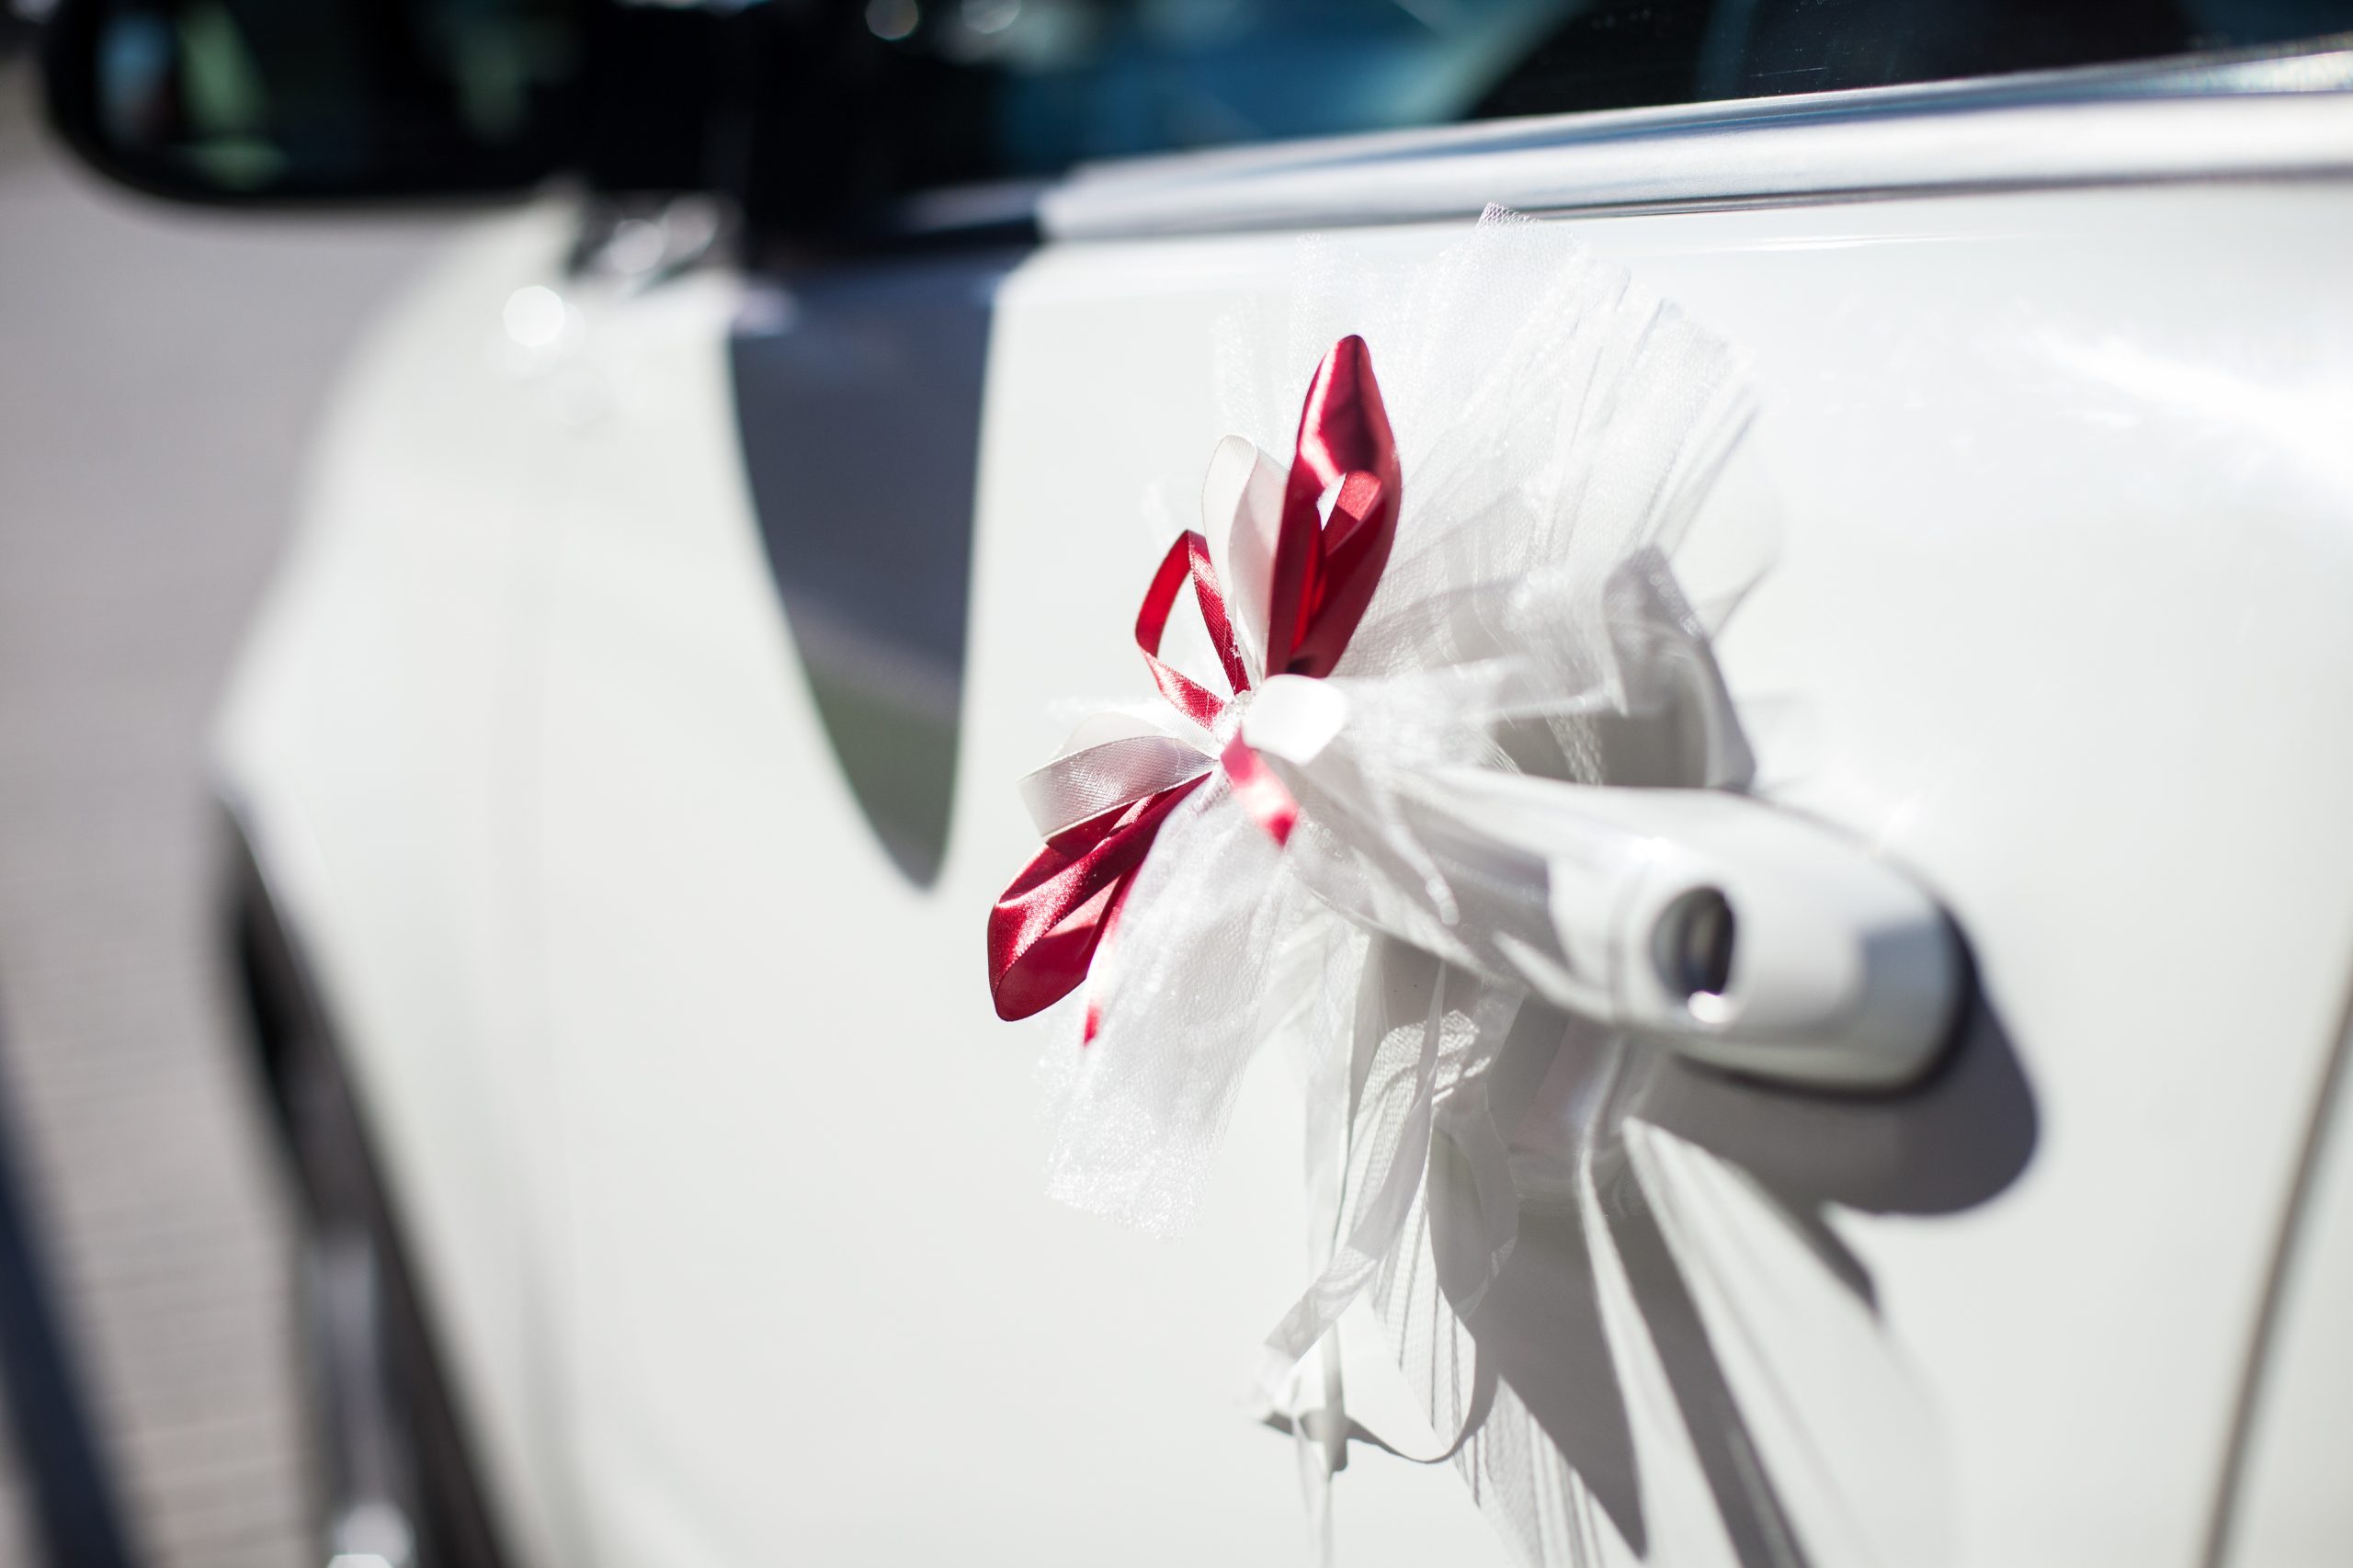 The decorations for wedding car